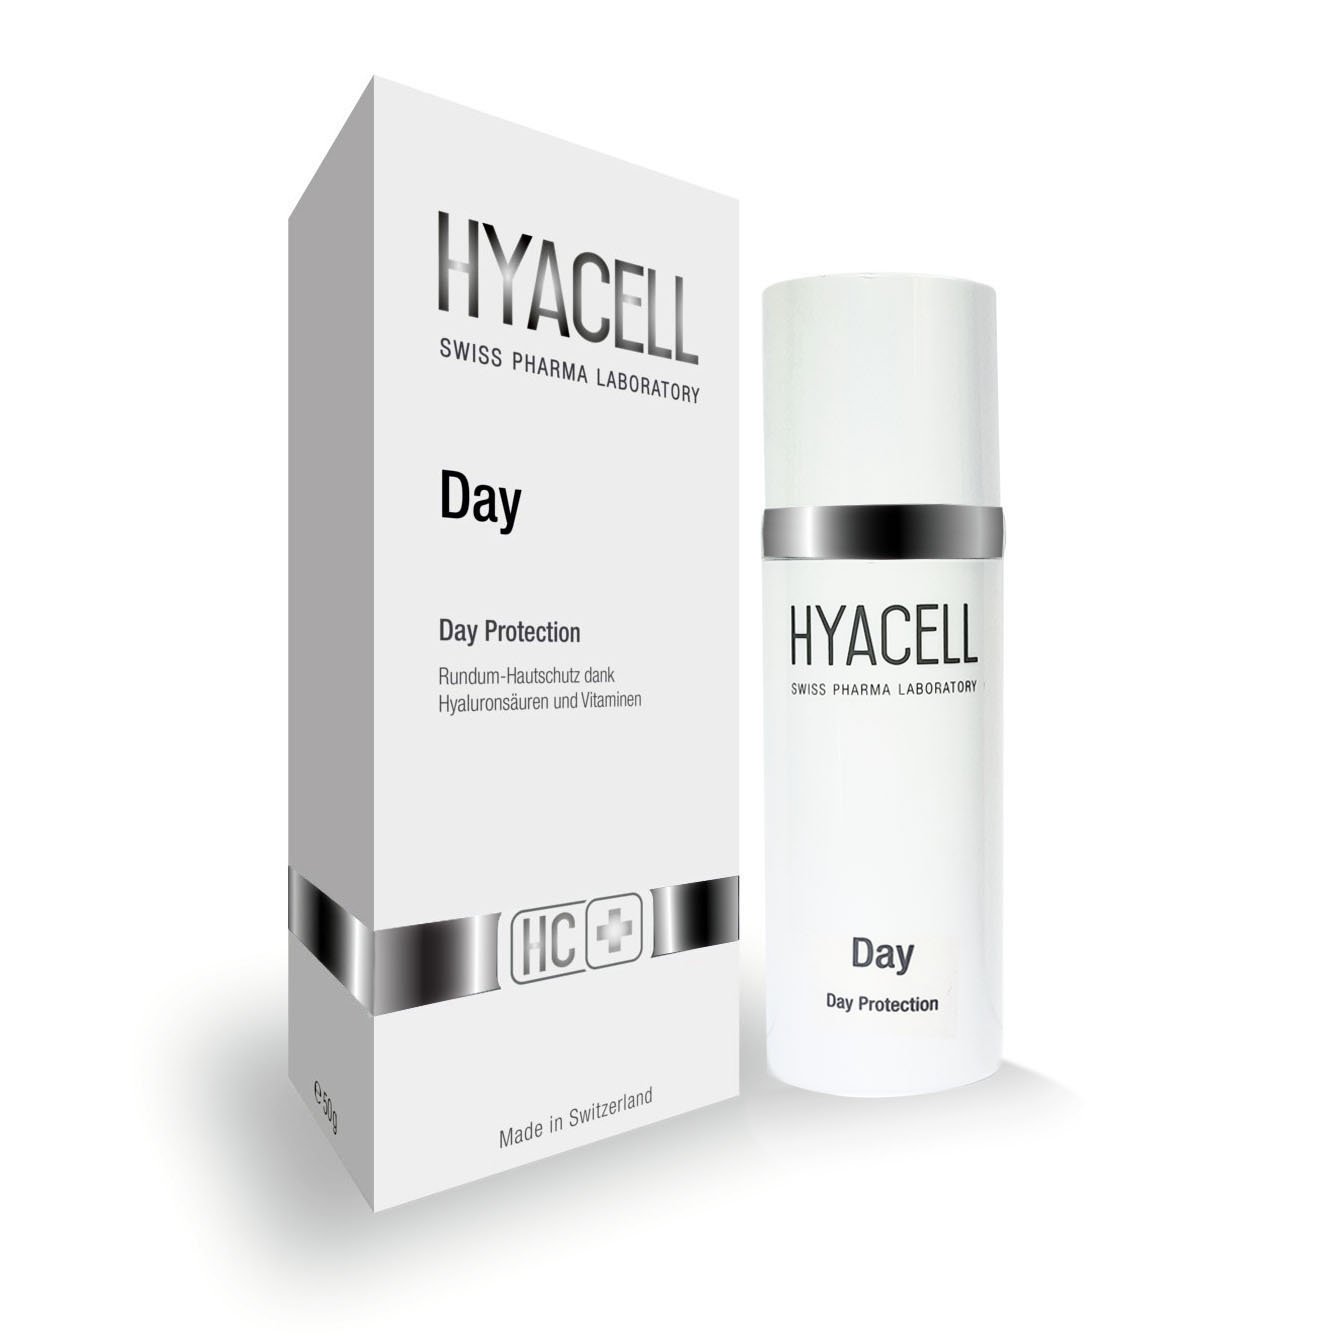 HYACELL DAY